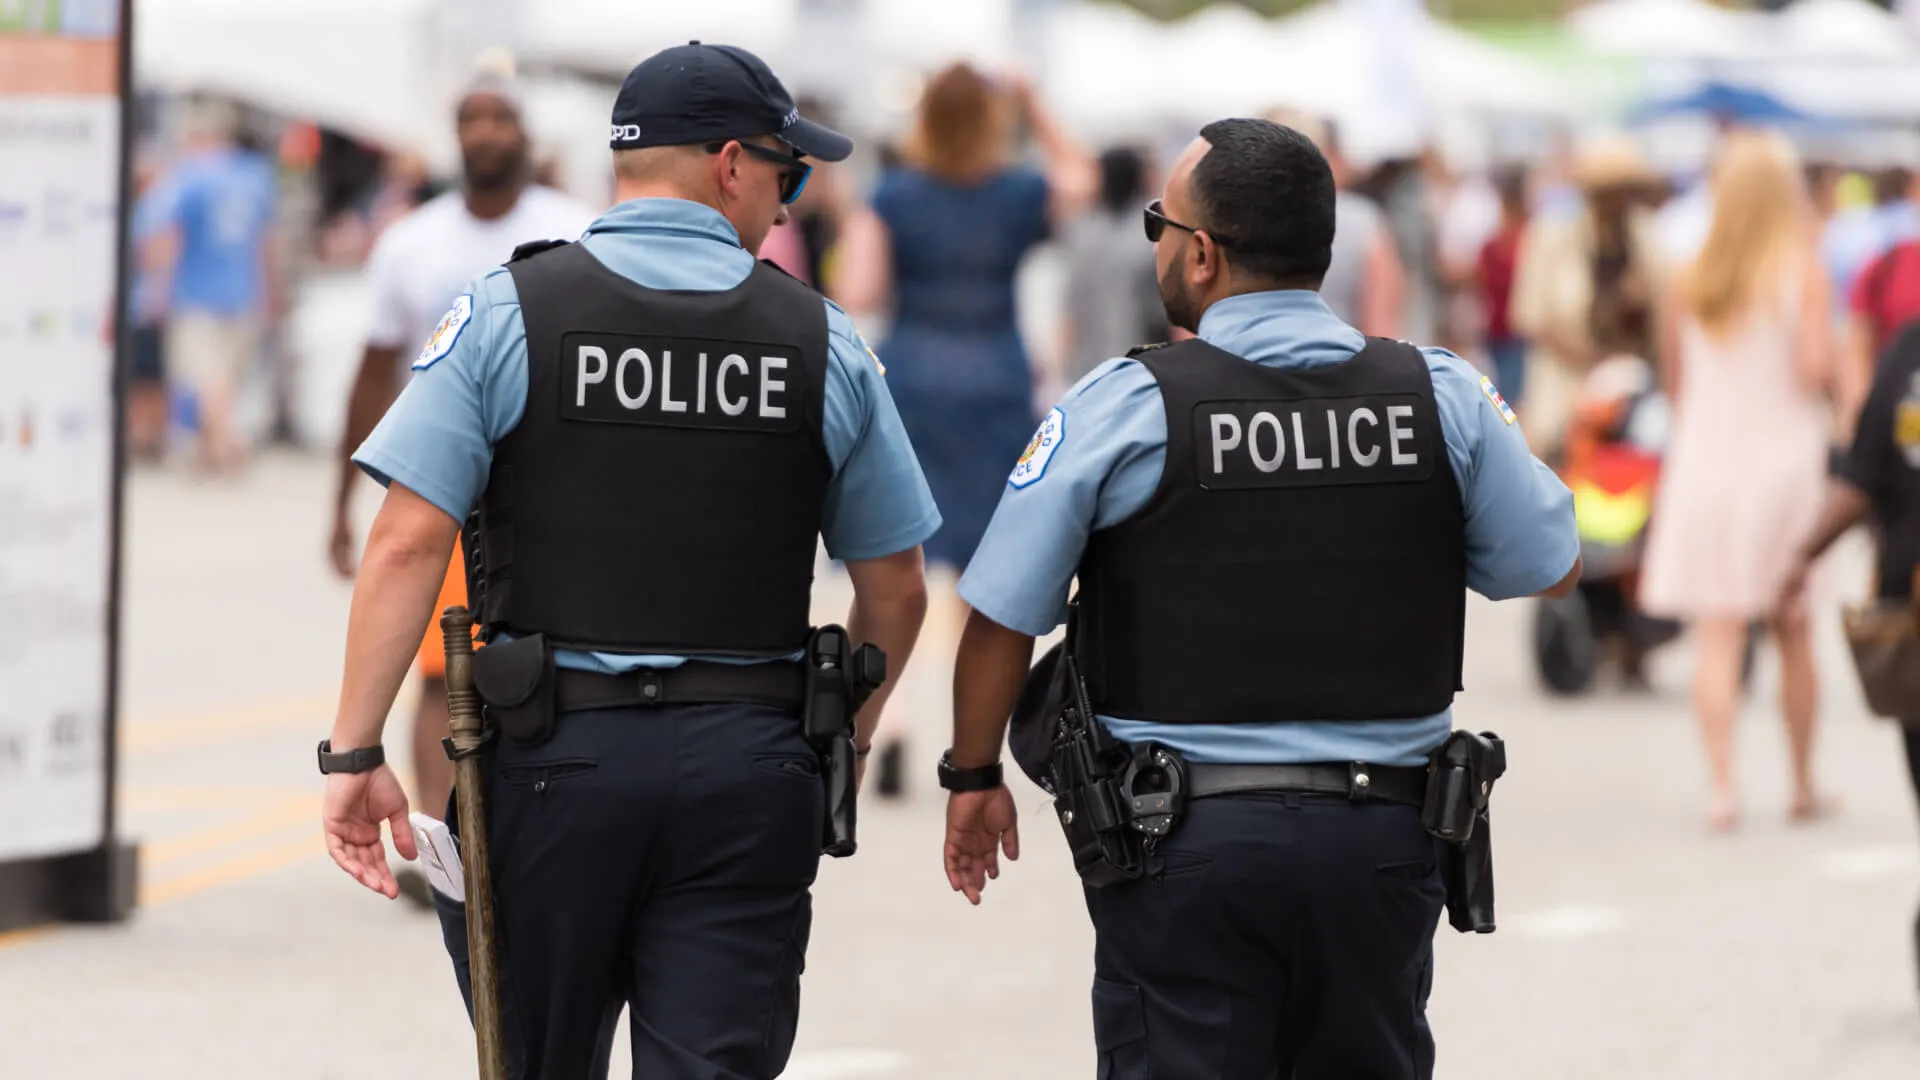 Chicago, USA - Jul 12, 2018: Police at the famous Chicago Taste festival  late in the day in Grant Park.